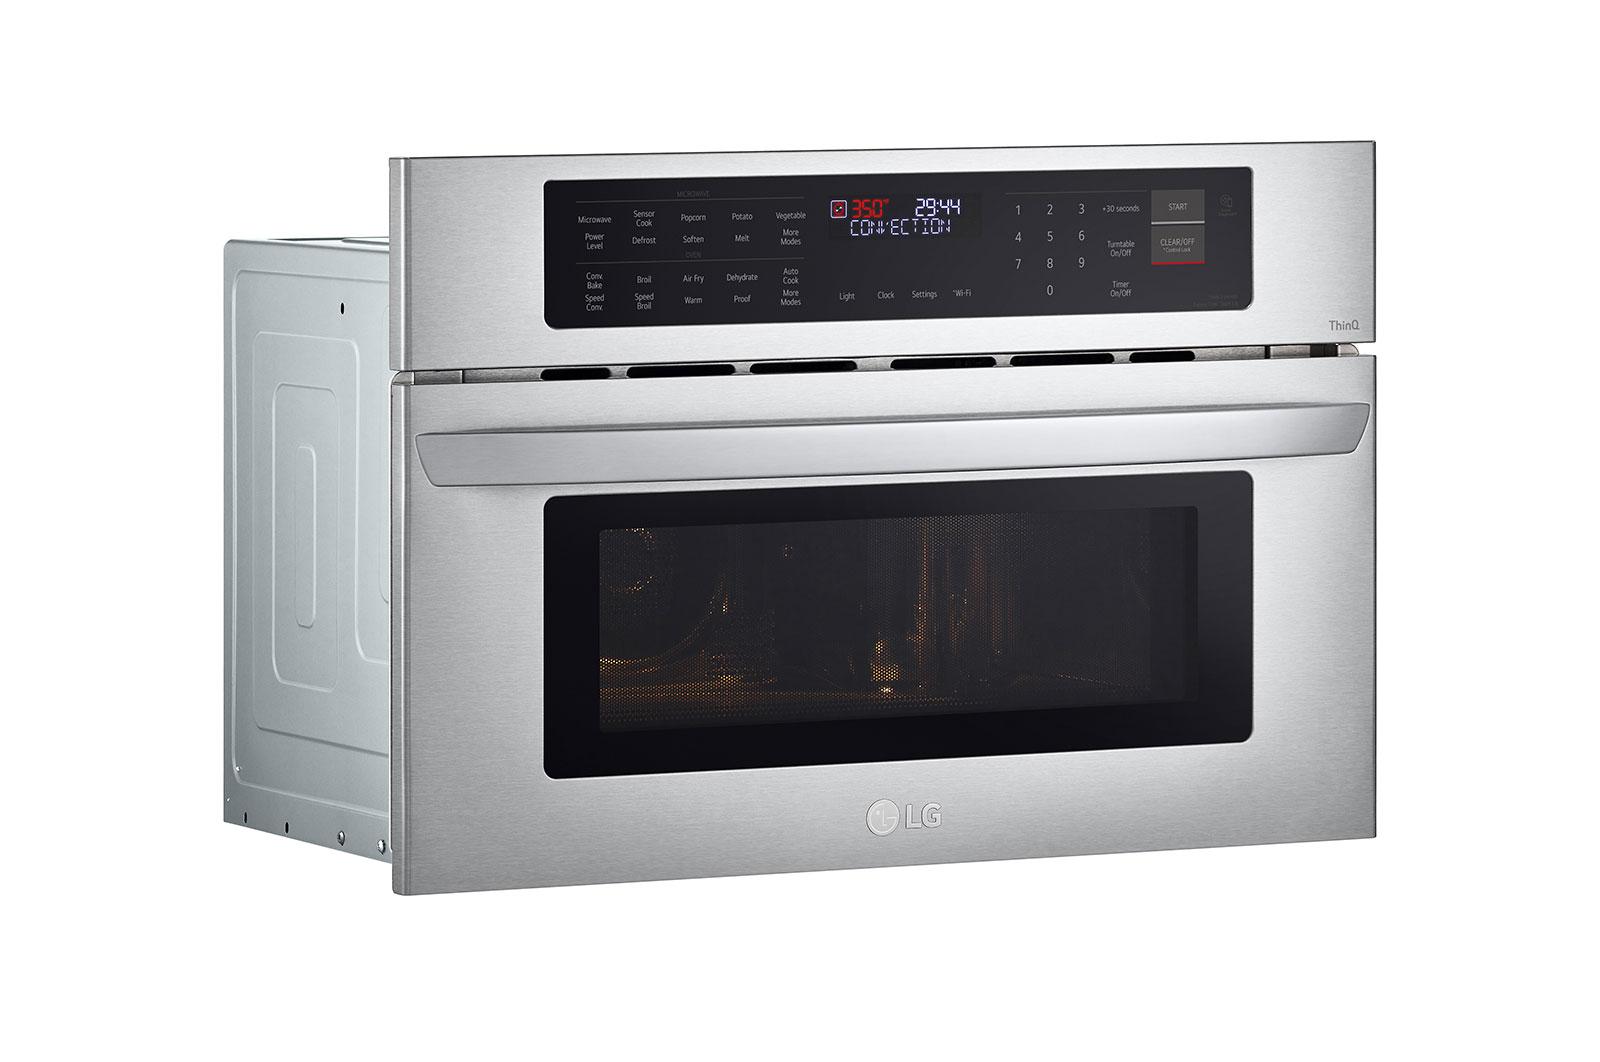 Lg 1.7 cu. ft. Smart Built-In Microwave Speed Oven